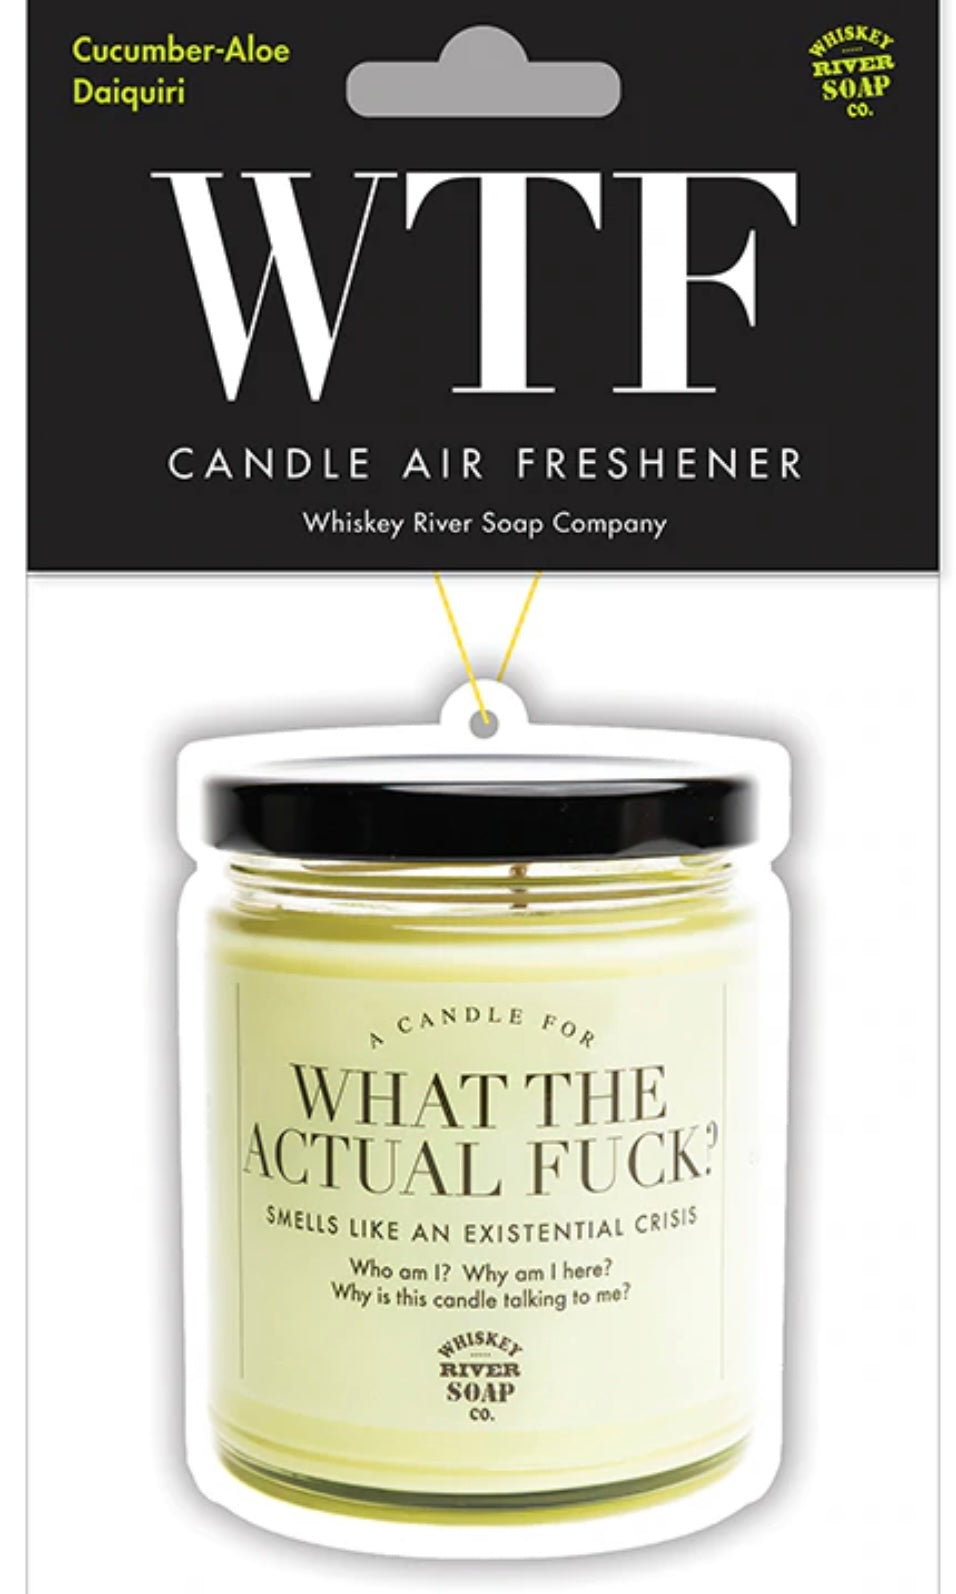 Whisky - River WTF Air Freshener for WHAT THE ACTUAL FUCK